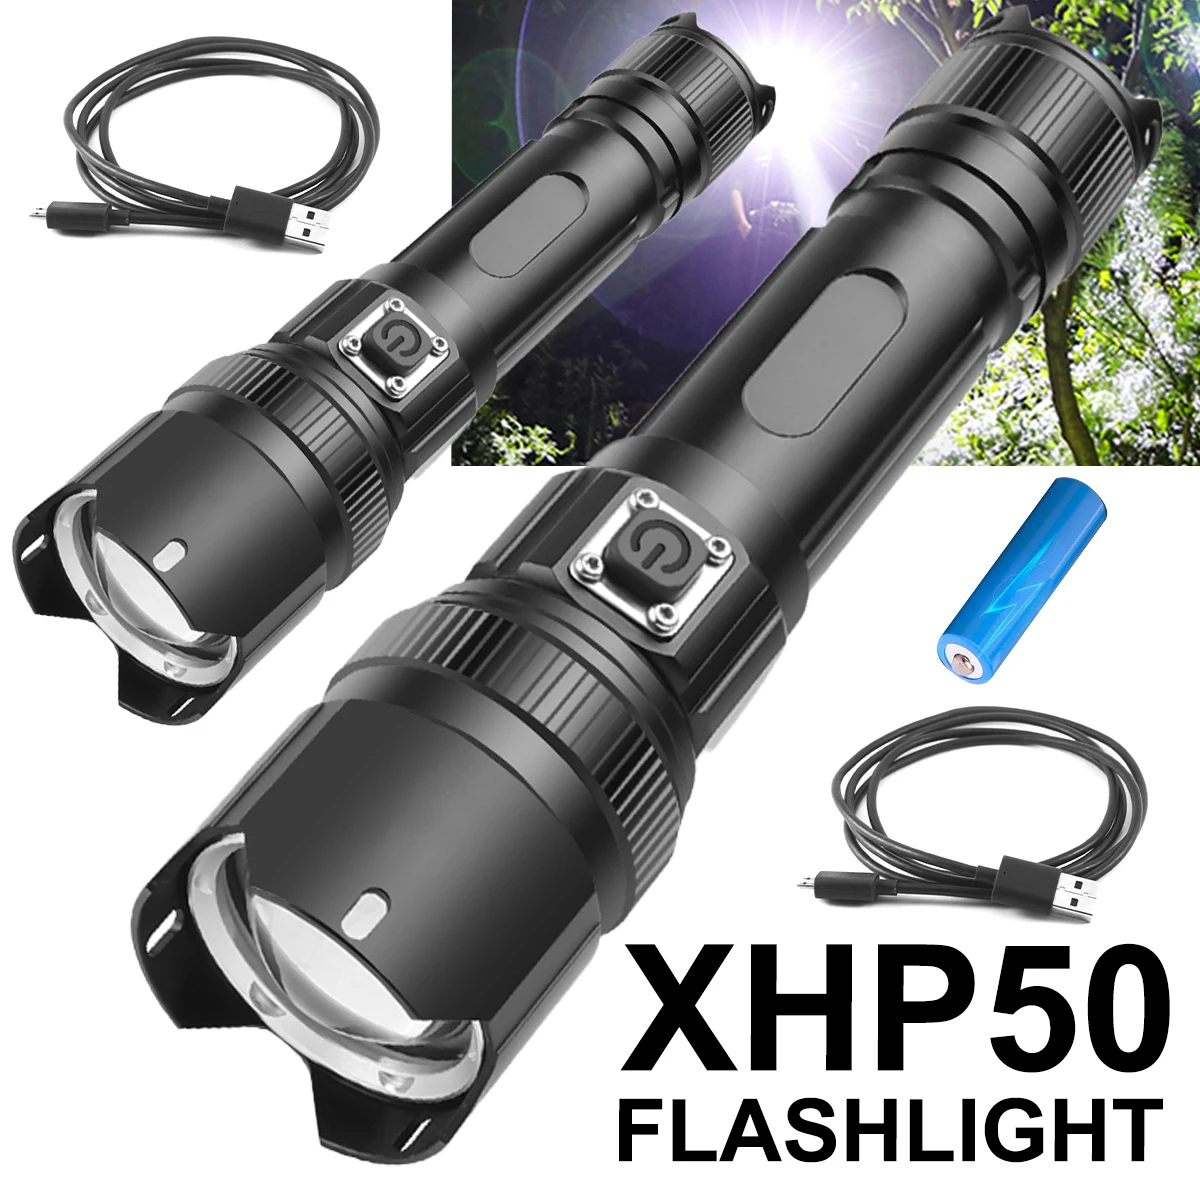 

Camping Emergency Searchlight Rechargeable XHP50 LED Flashlight 800-1000 Lumens Zoomable Torch 5 Modes Lighting Waterproof